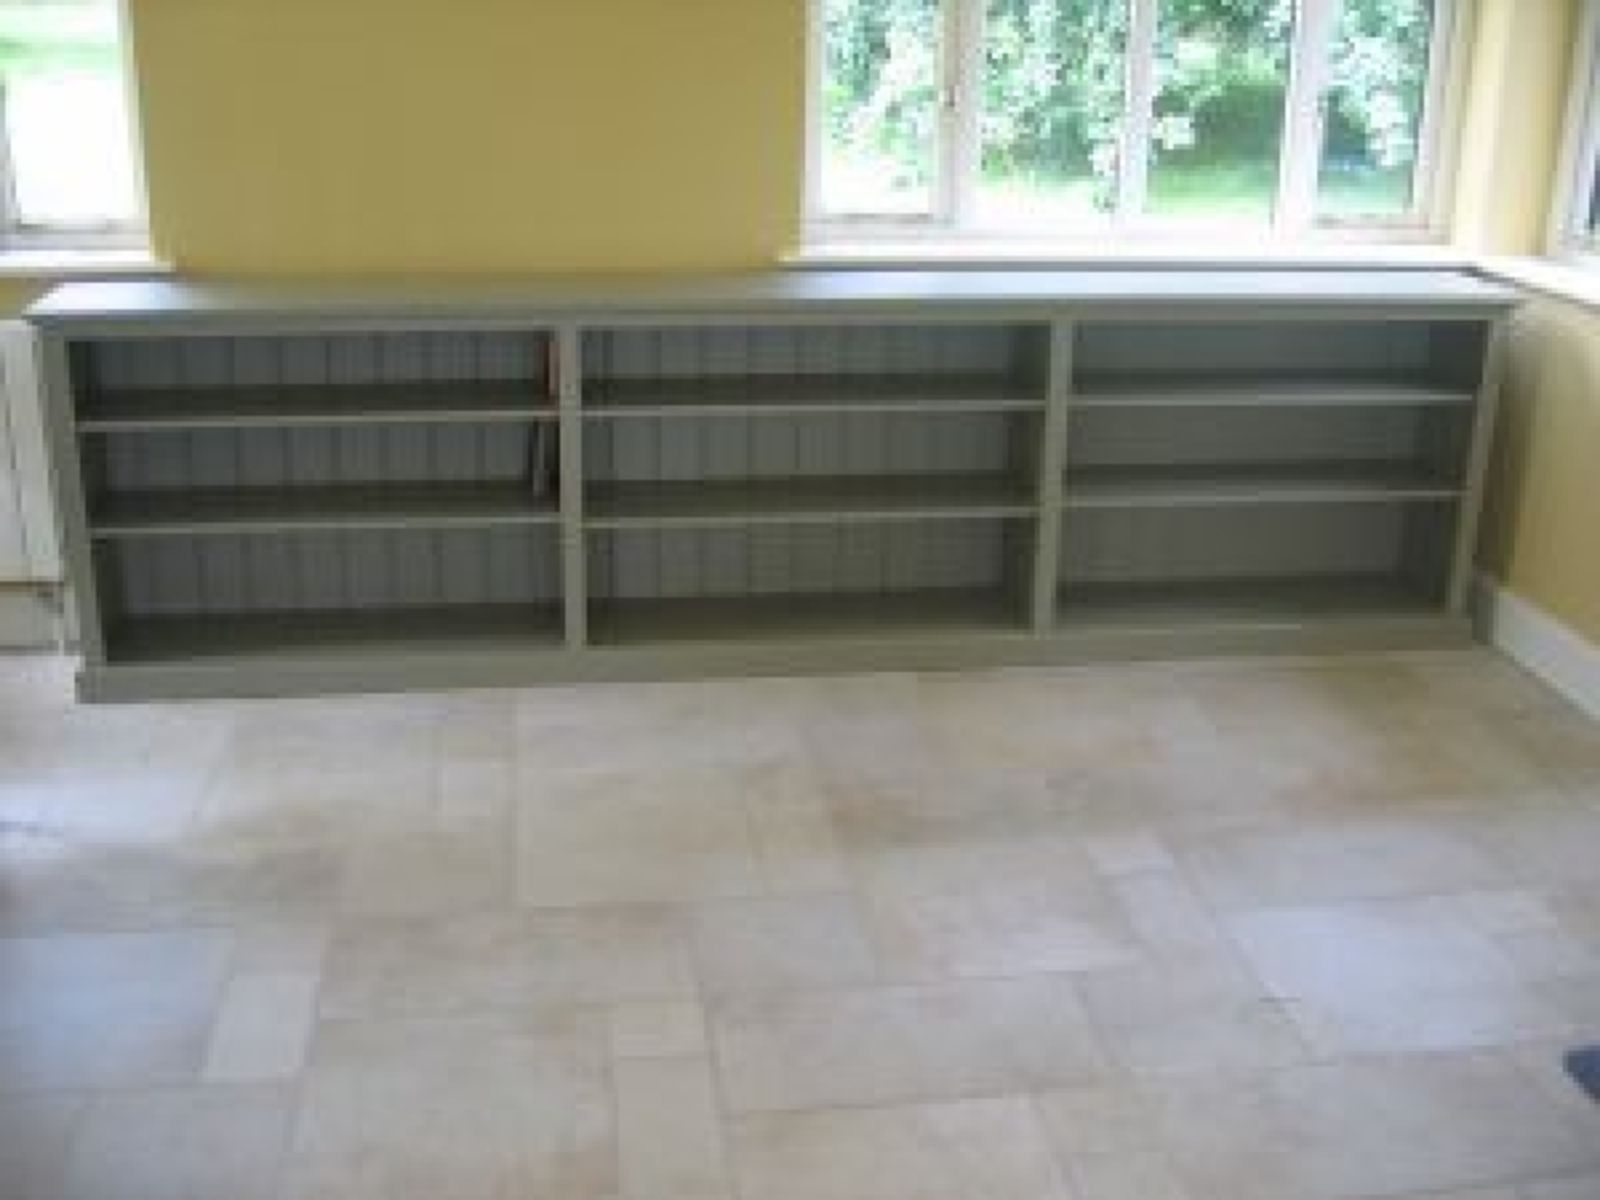 Long Low Bookcases Regarding Popular Bookcases Ideas: Bookcases Modern And Traditional Ikea Low Cost (View 1 of 15)